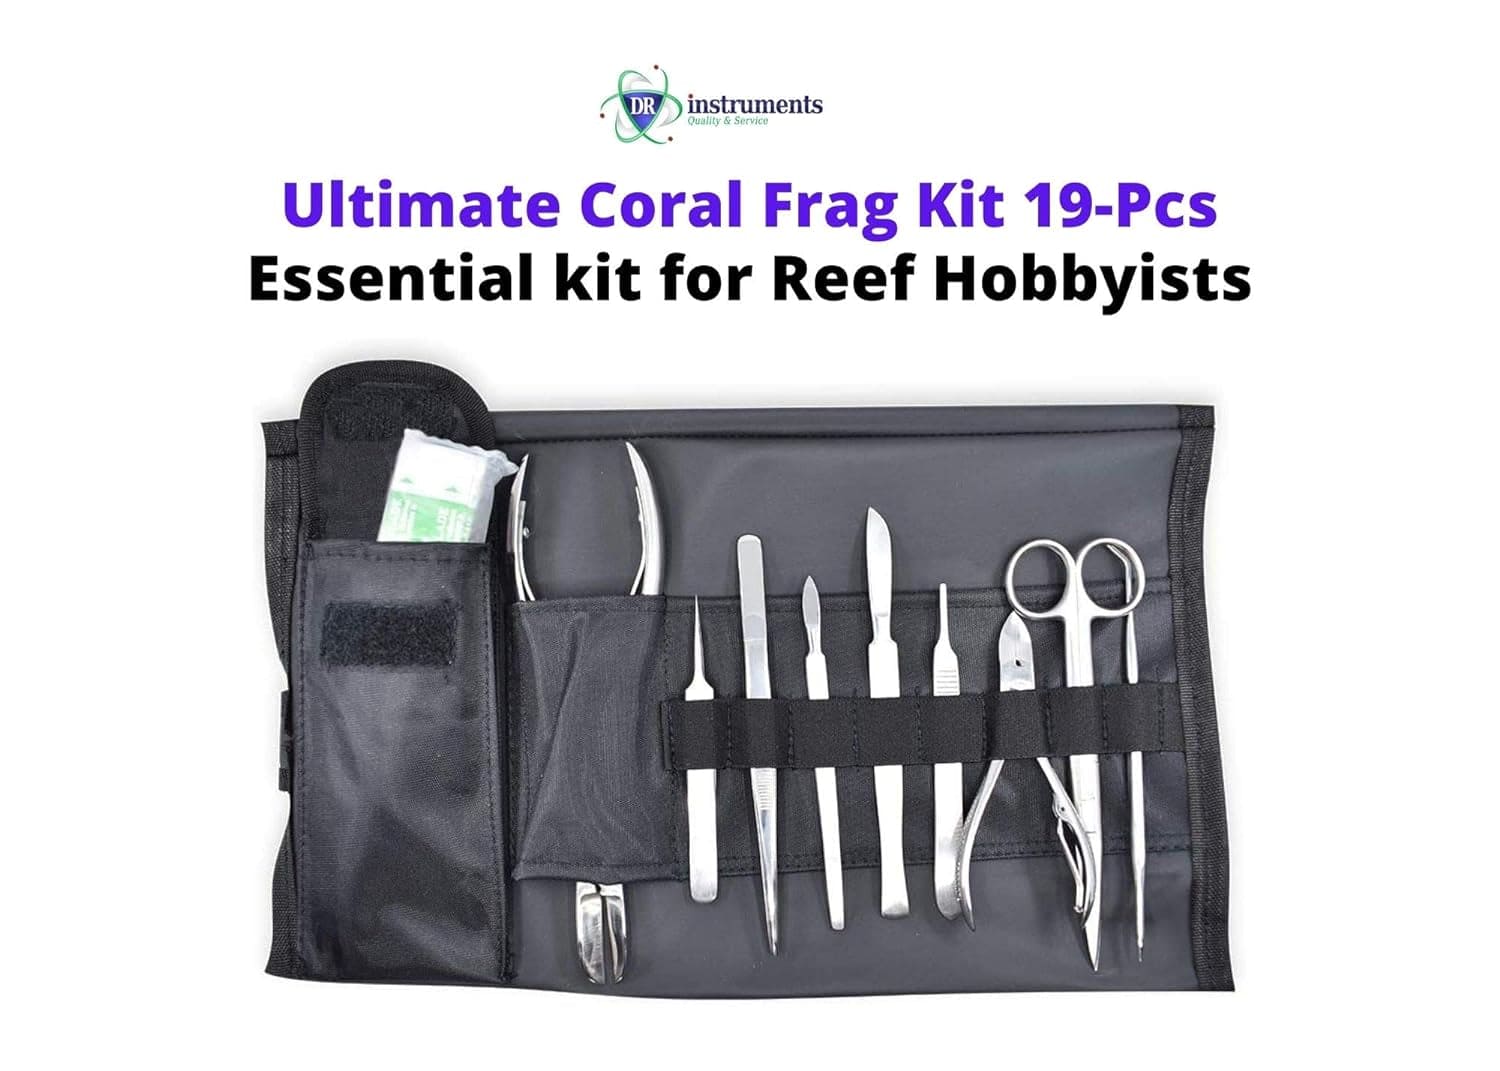 10FK Ultimate Coral Fragging and Coral Propagation Kit for Reef Hobbyists - 19 Pcs, Rollup Case, Stainless Steel Instruments